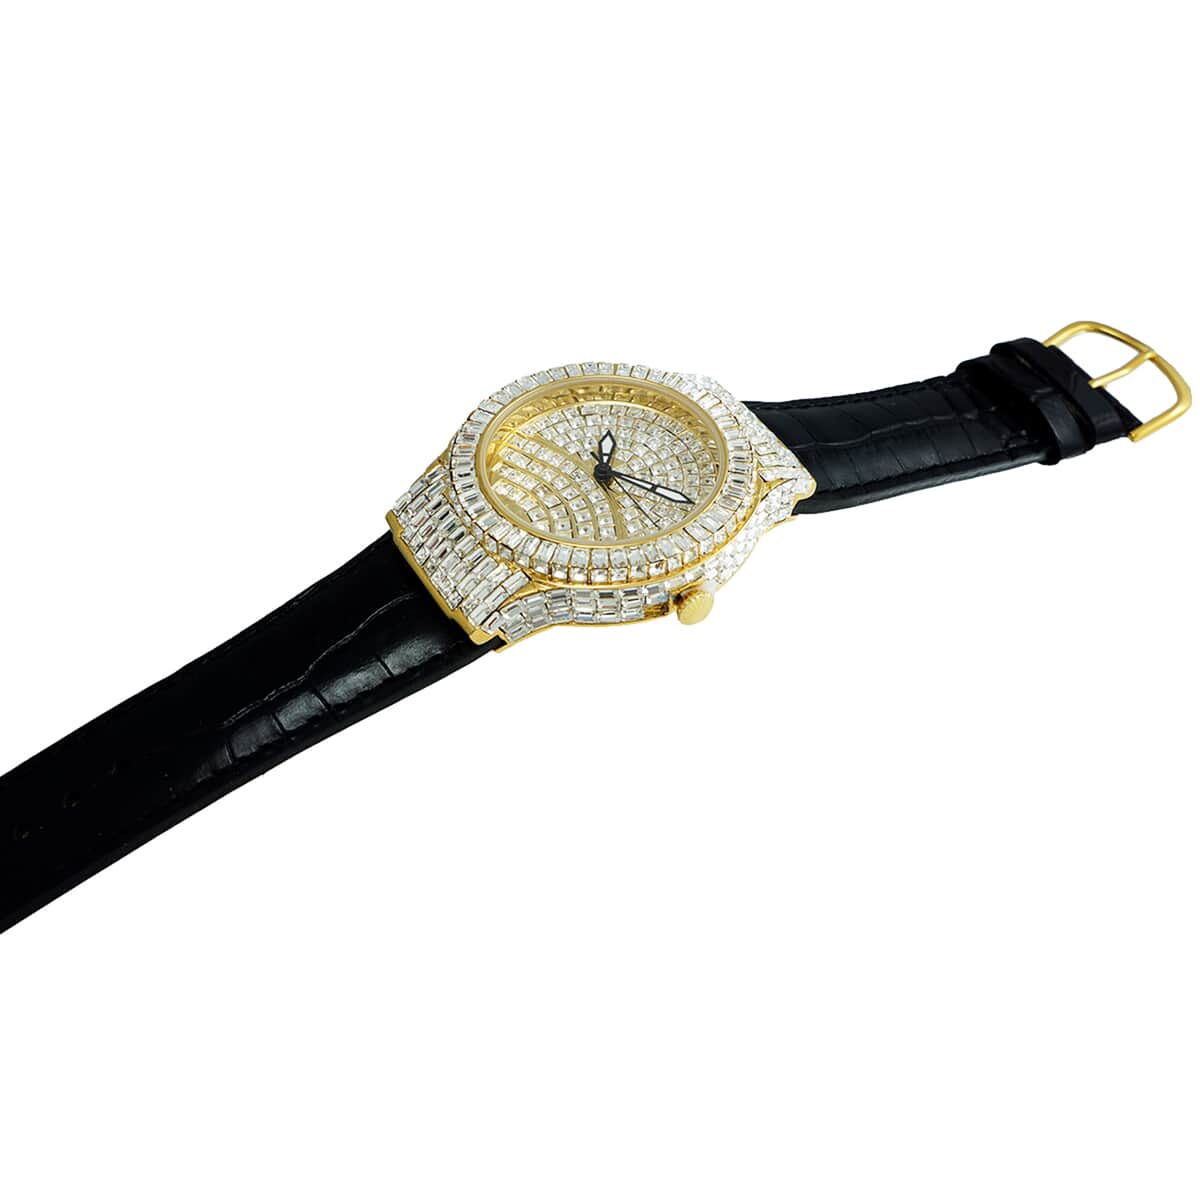 Adee Kaye Austrian Crystal Japan Quartz Movement Goldtone Dial Watch in Black Leather Band (26 mm) | Best Watch for Women | Designer Women's Wrist Watch image number 1